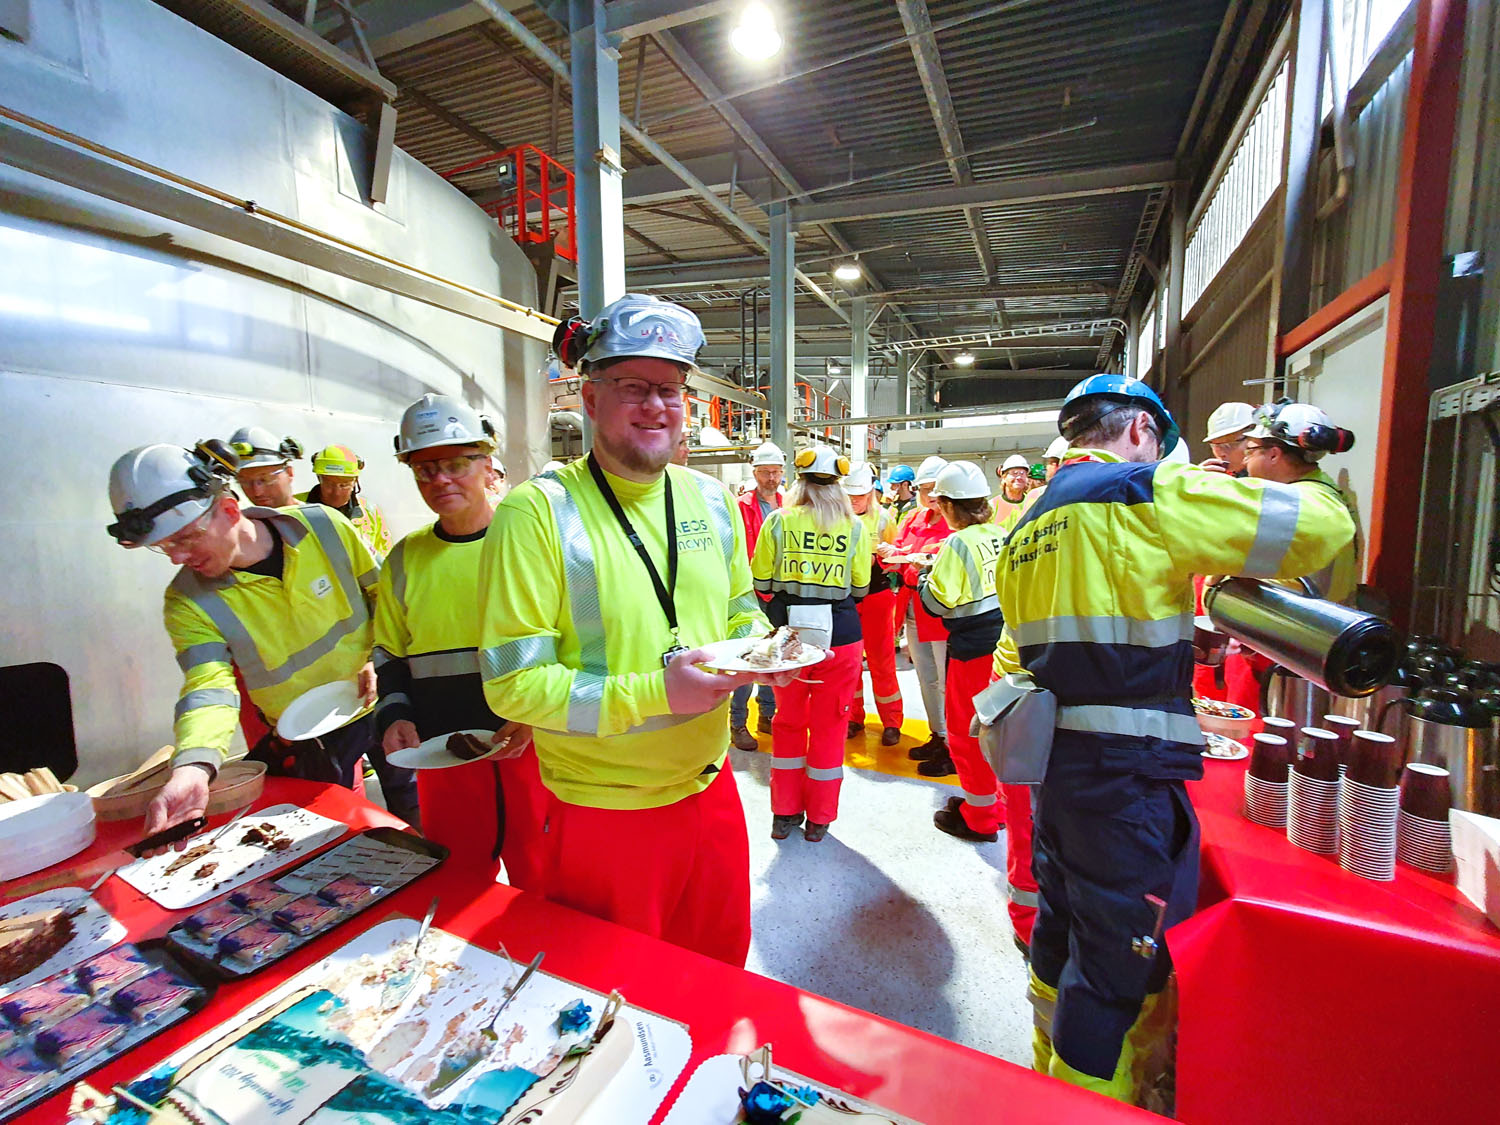 Colleagues are queuing up to help themselves to cake, celebrating an event, personal protective Equipment red trousers and yellow jumpers, white helmets, event takes place in the factory hall.